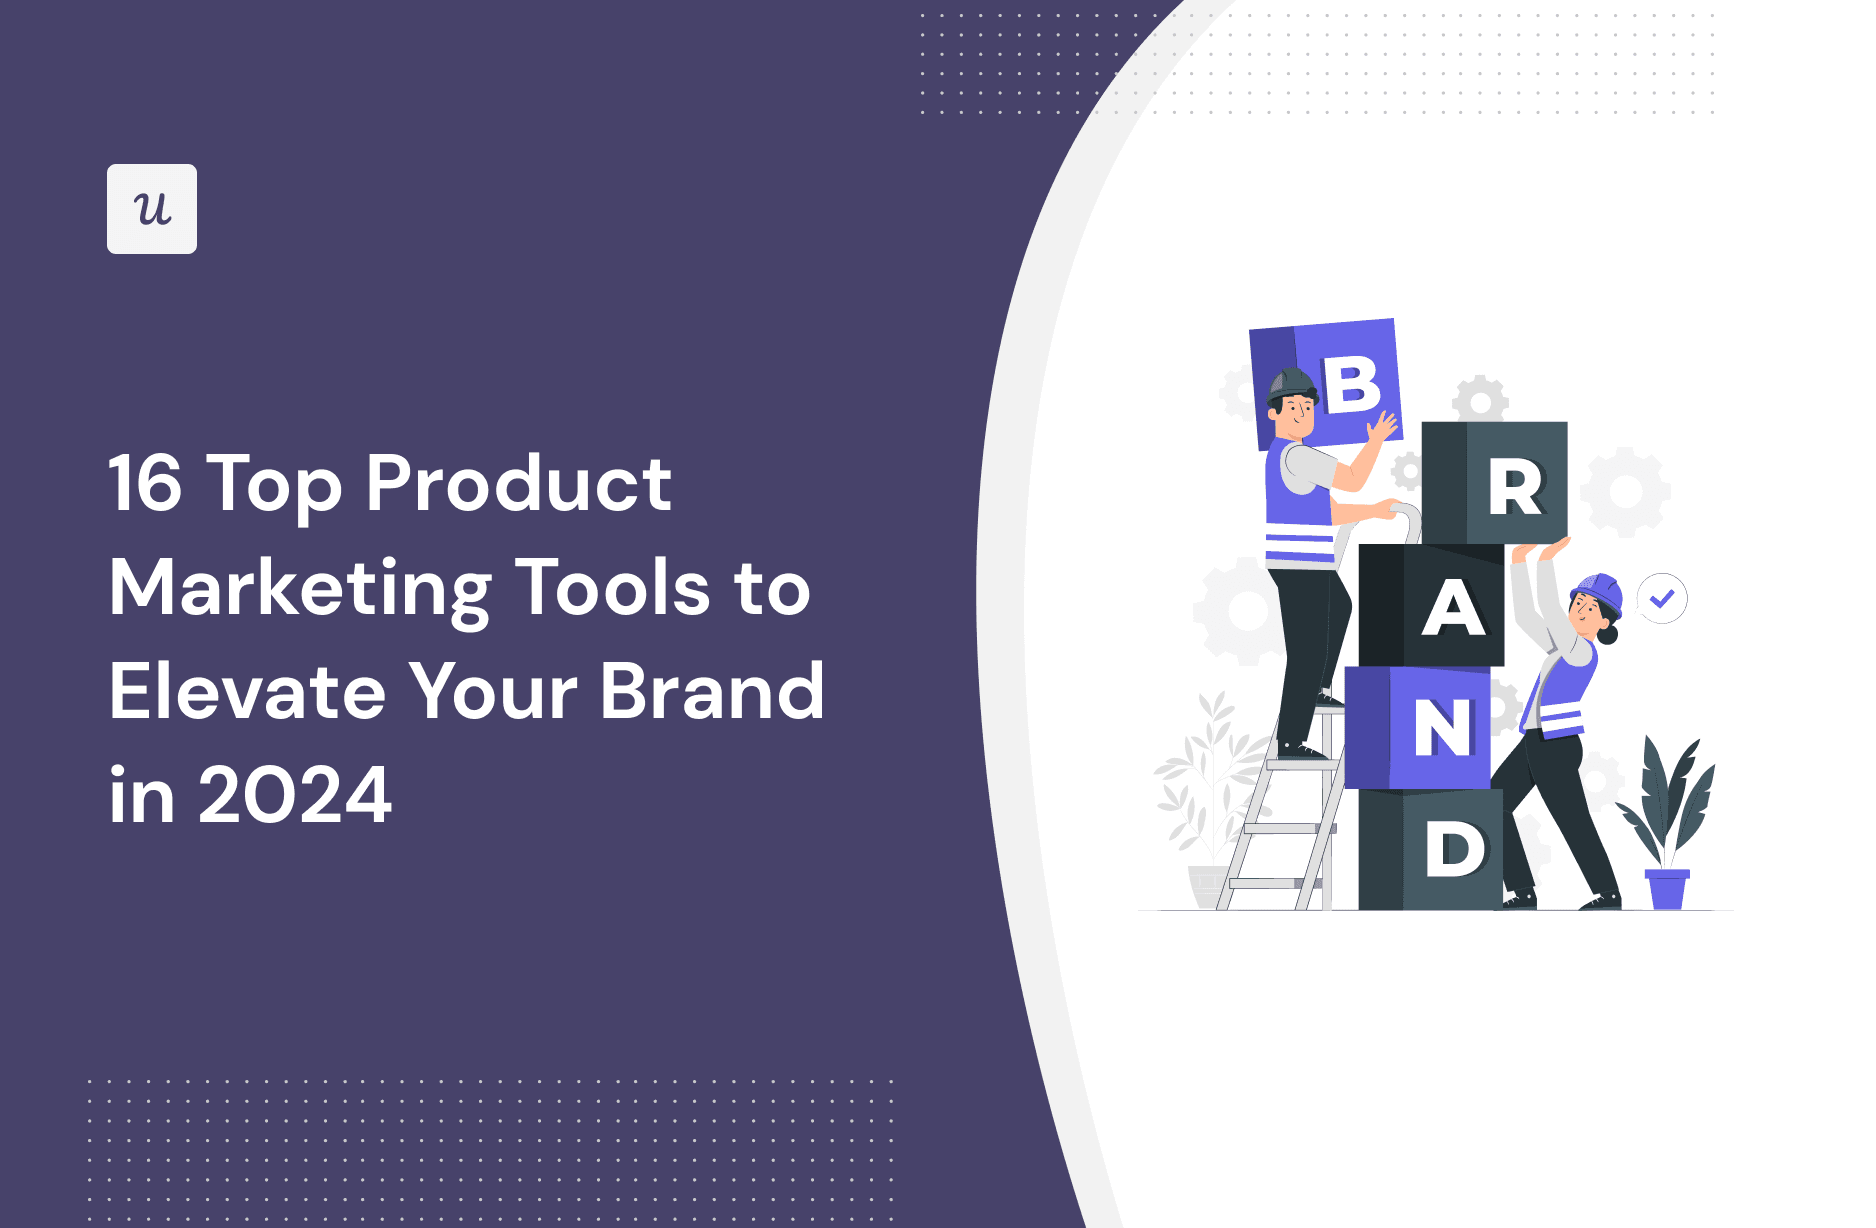 16 Top Product Marketing Tools to Elevate Your Brand in 2024 cover